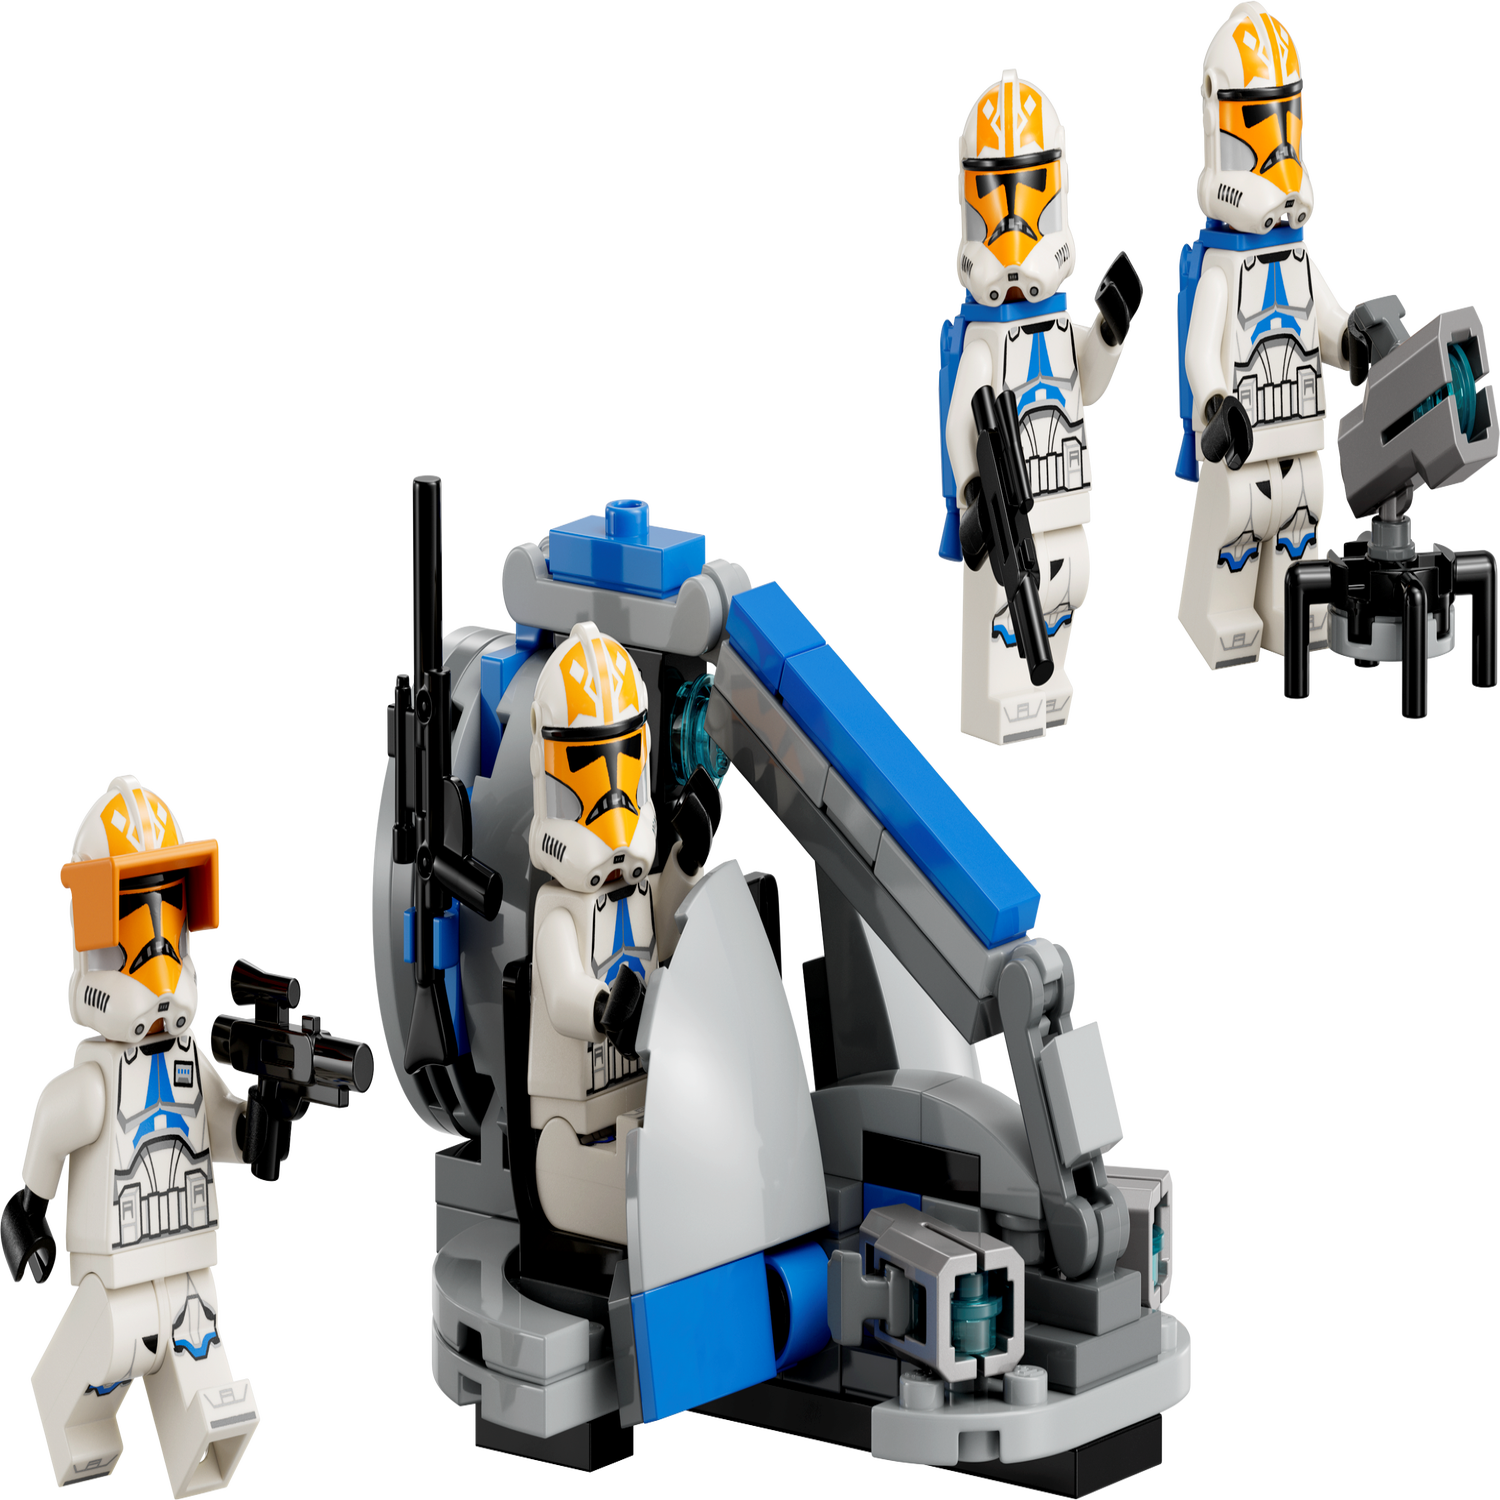 The Child 75318 | Star Wars™ | Buy online at the Official LEGO® Shop US